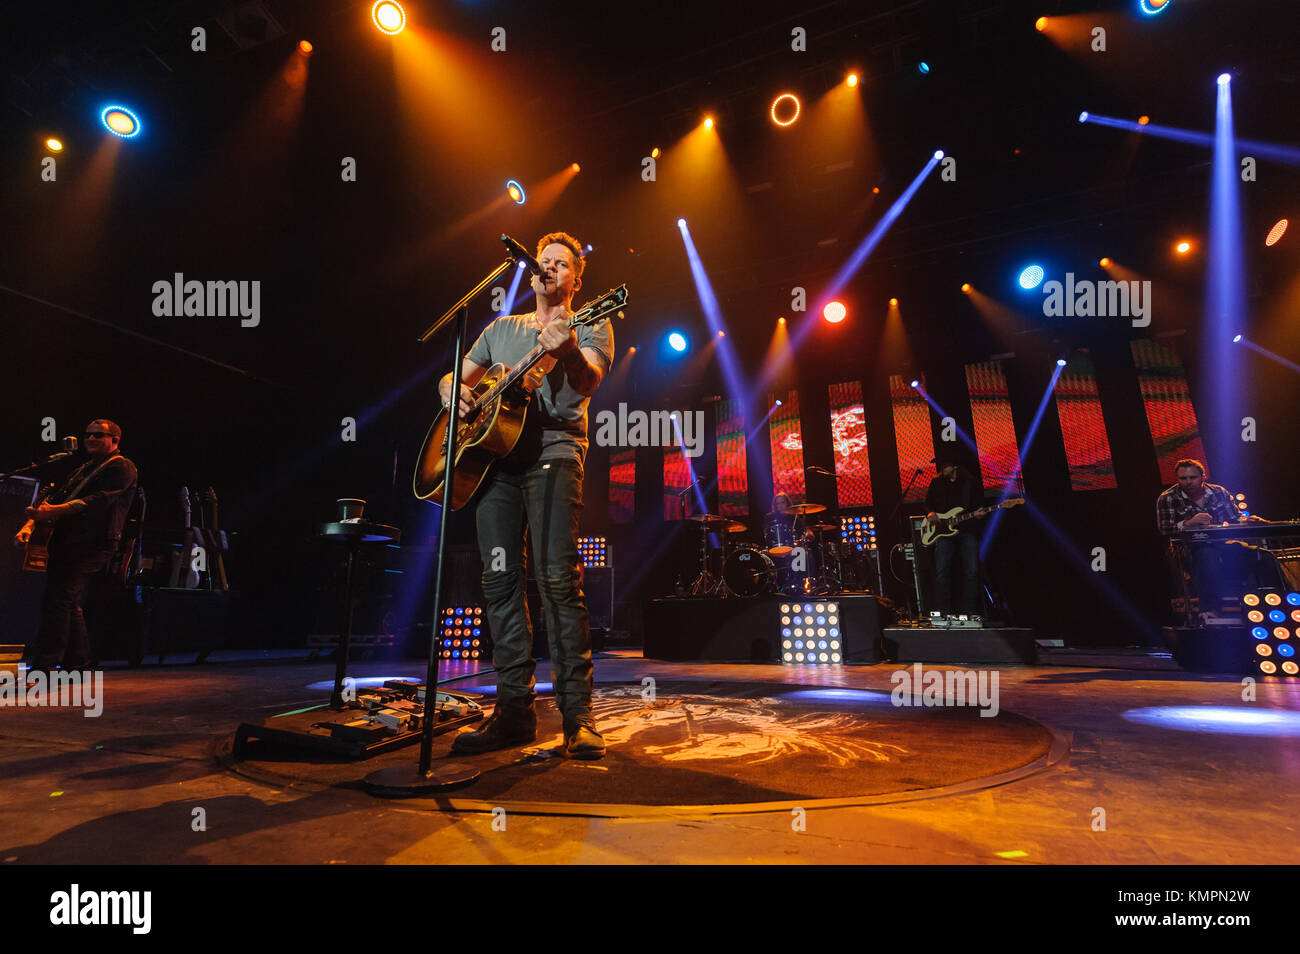 Las Vegas, NV, USA. 8th Dec, 2017. ***HOUSE COVERAGE*** Gary Allen at The Joint at Hard Rock Hotel & Casino in Las vegas, NV on December 8, 2017. Credit: Gdp Photos/Mediapunch/Alamy Live News Stock Photo